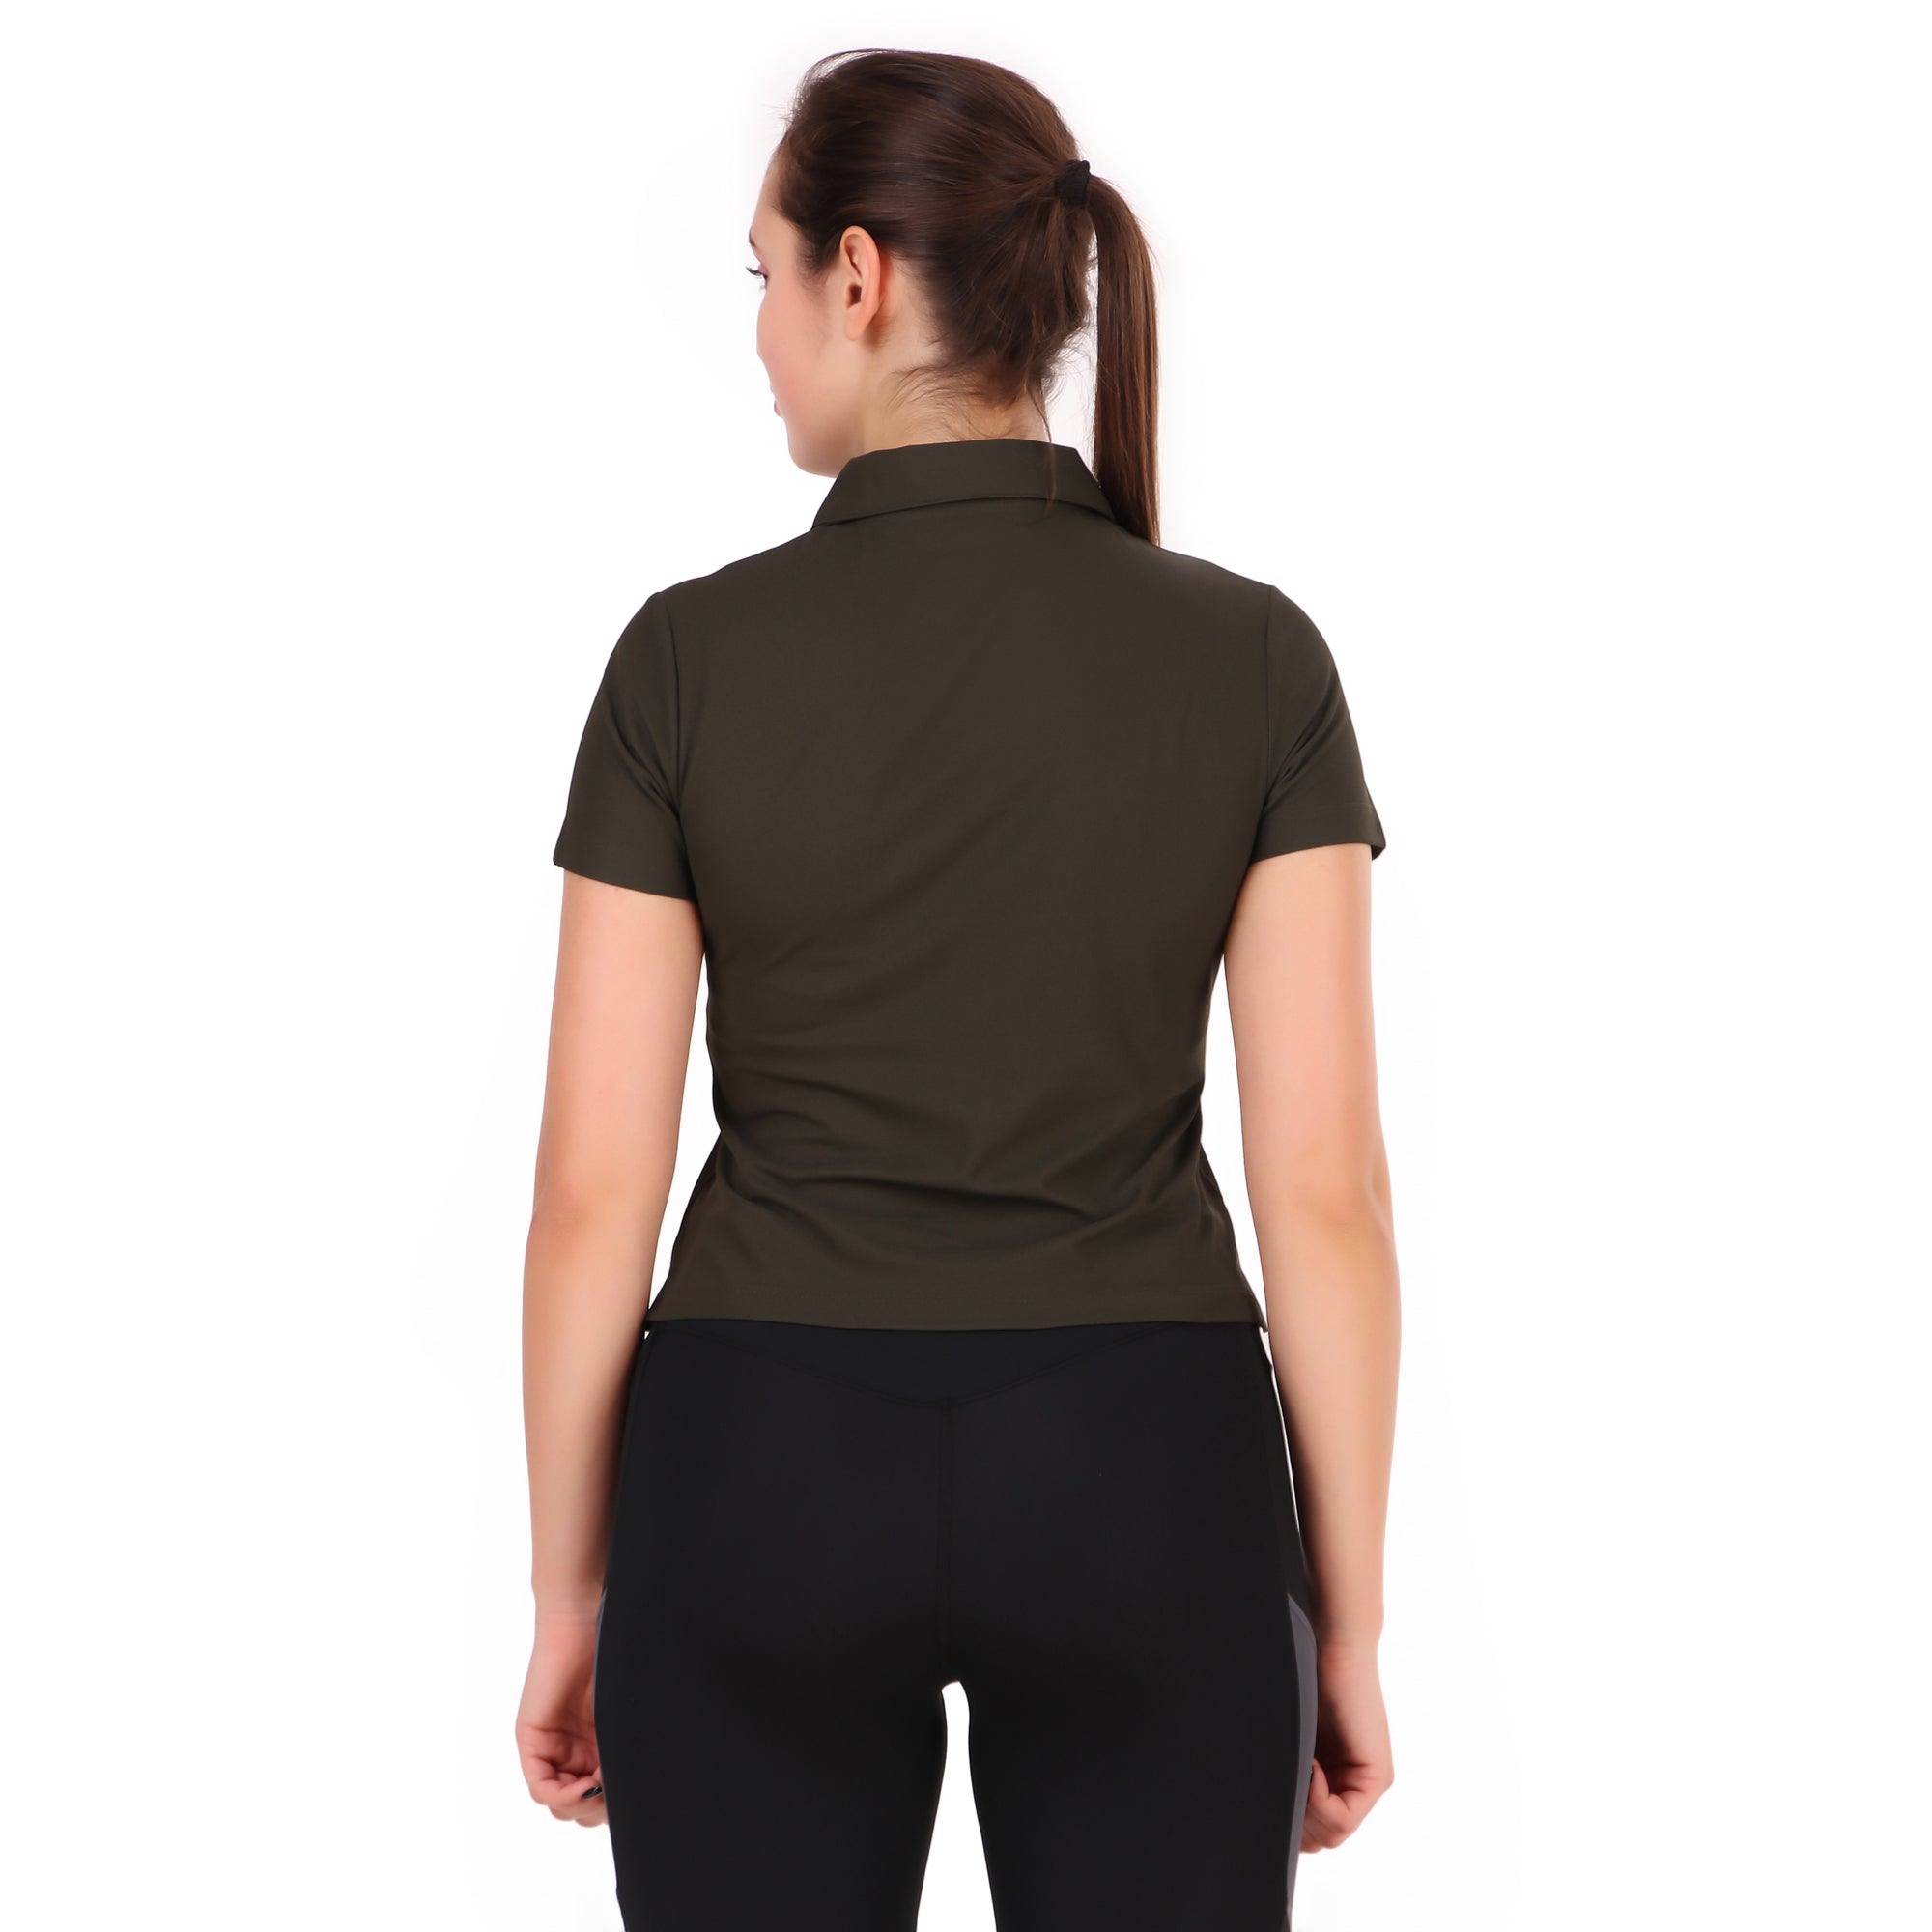 Activewear Polo Crop Top For Women (Olive)